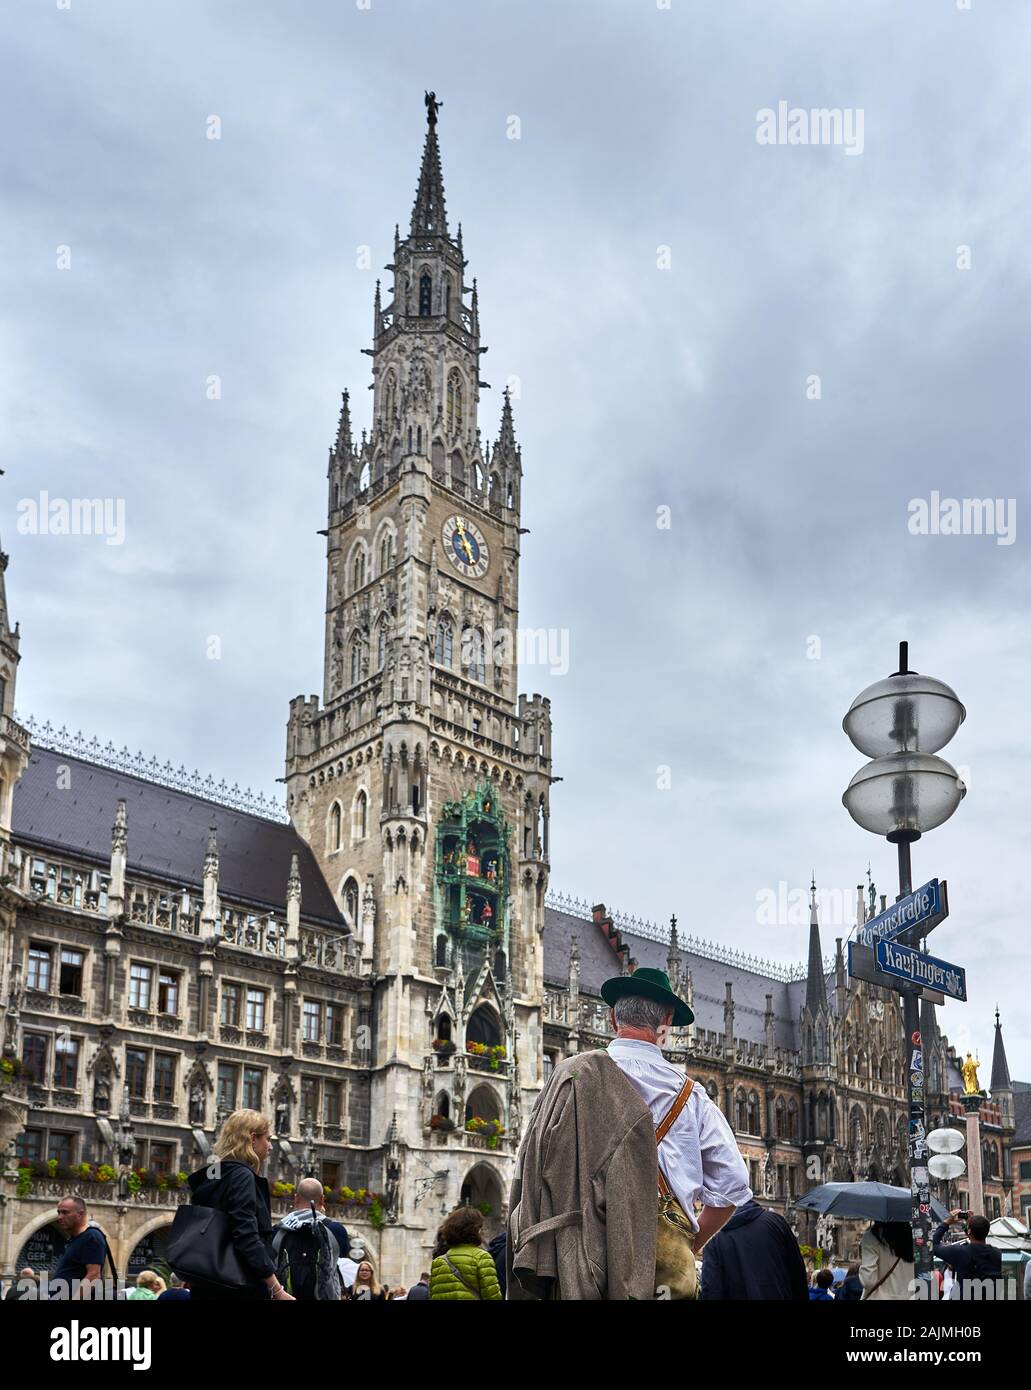 Man dressed in traditional Bavarian outfit watches the famous Rathaus Glockenspiel in Marienplatz, Munich, Germany. Stock Photo